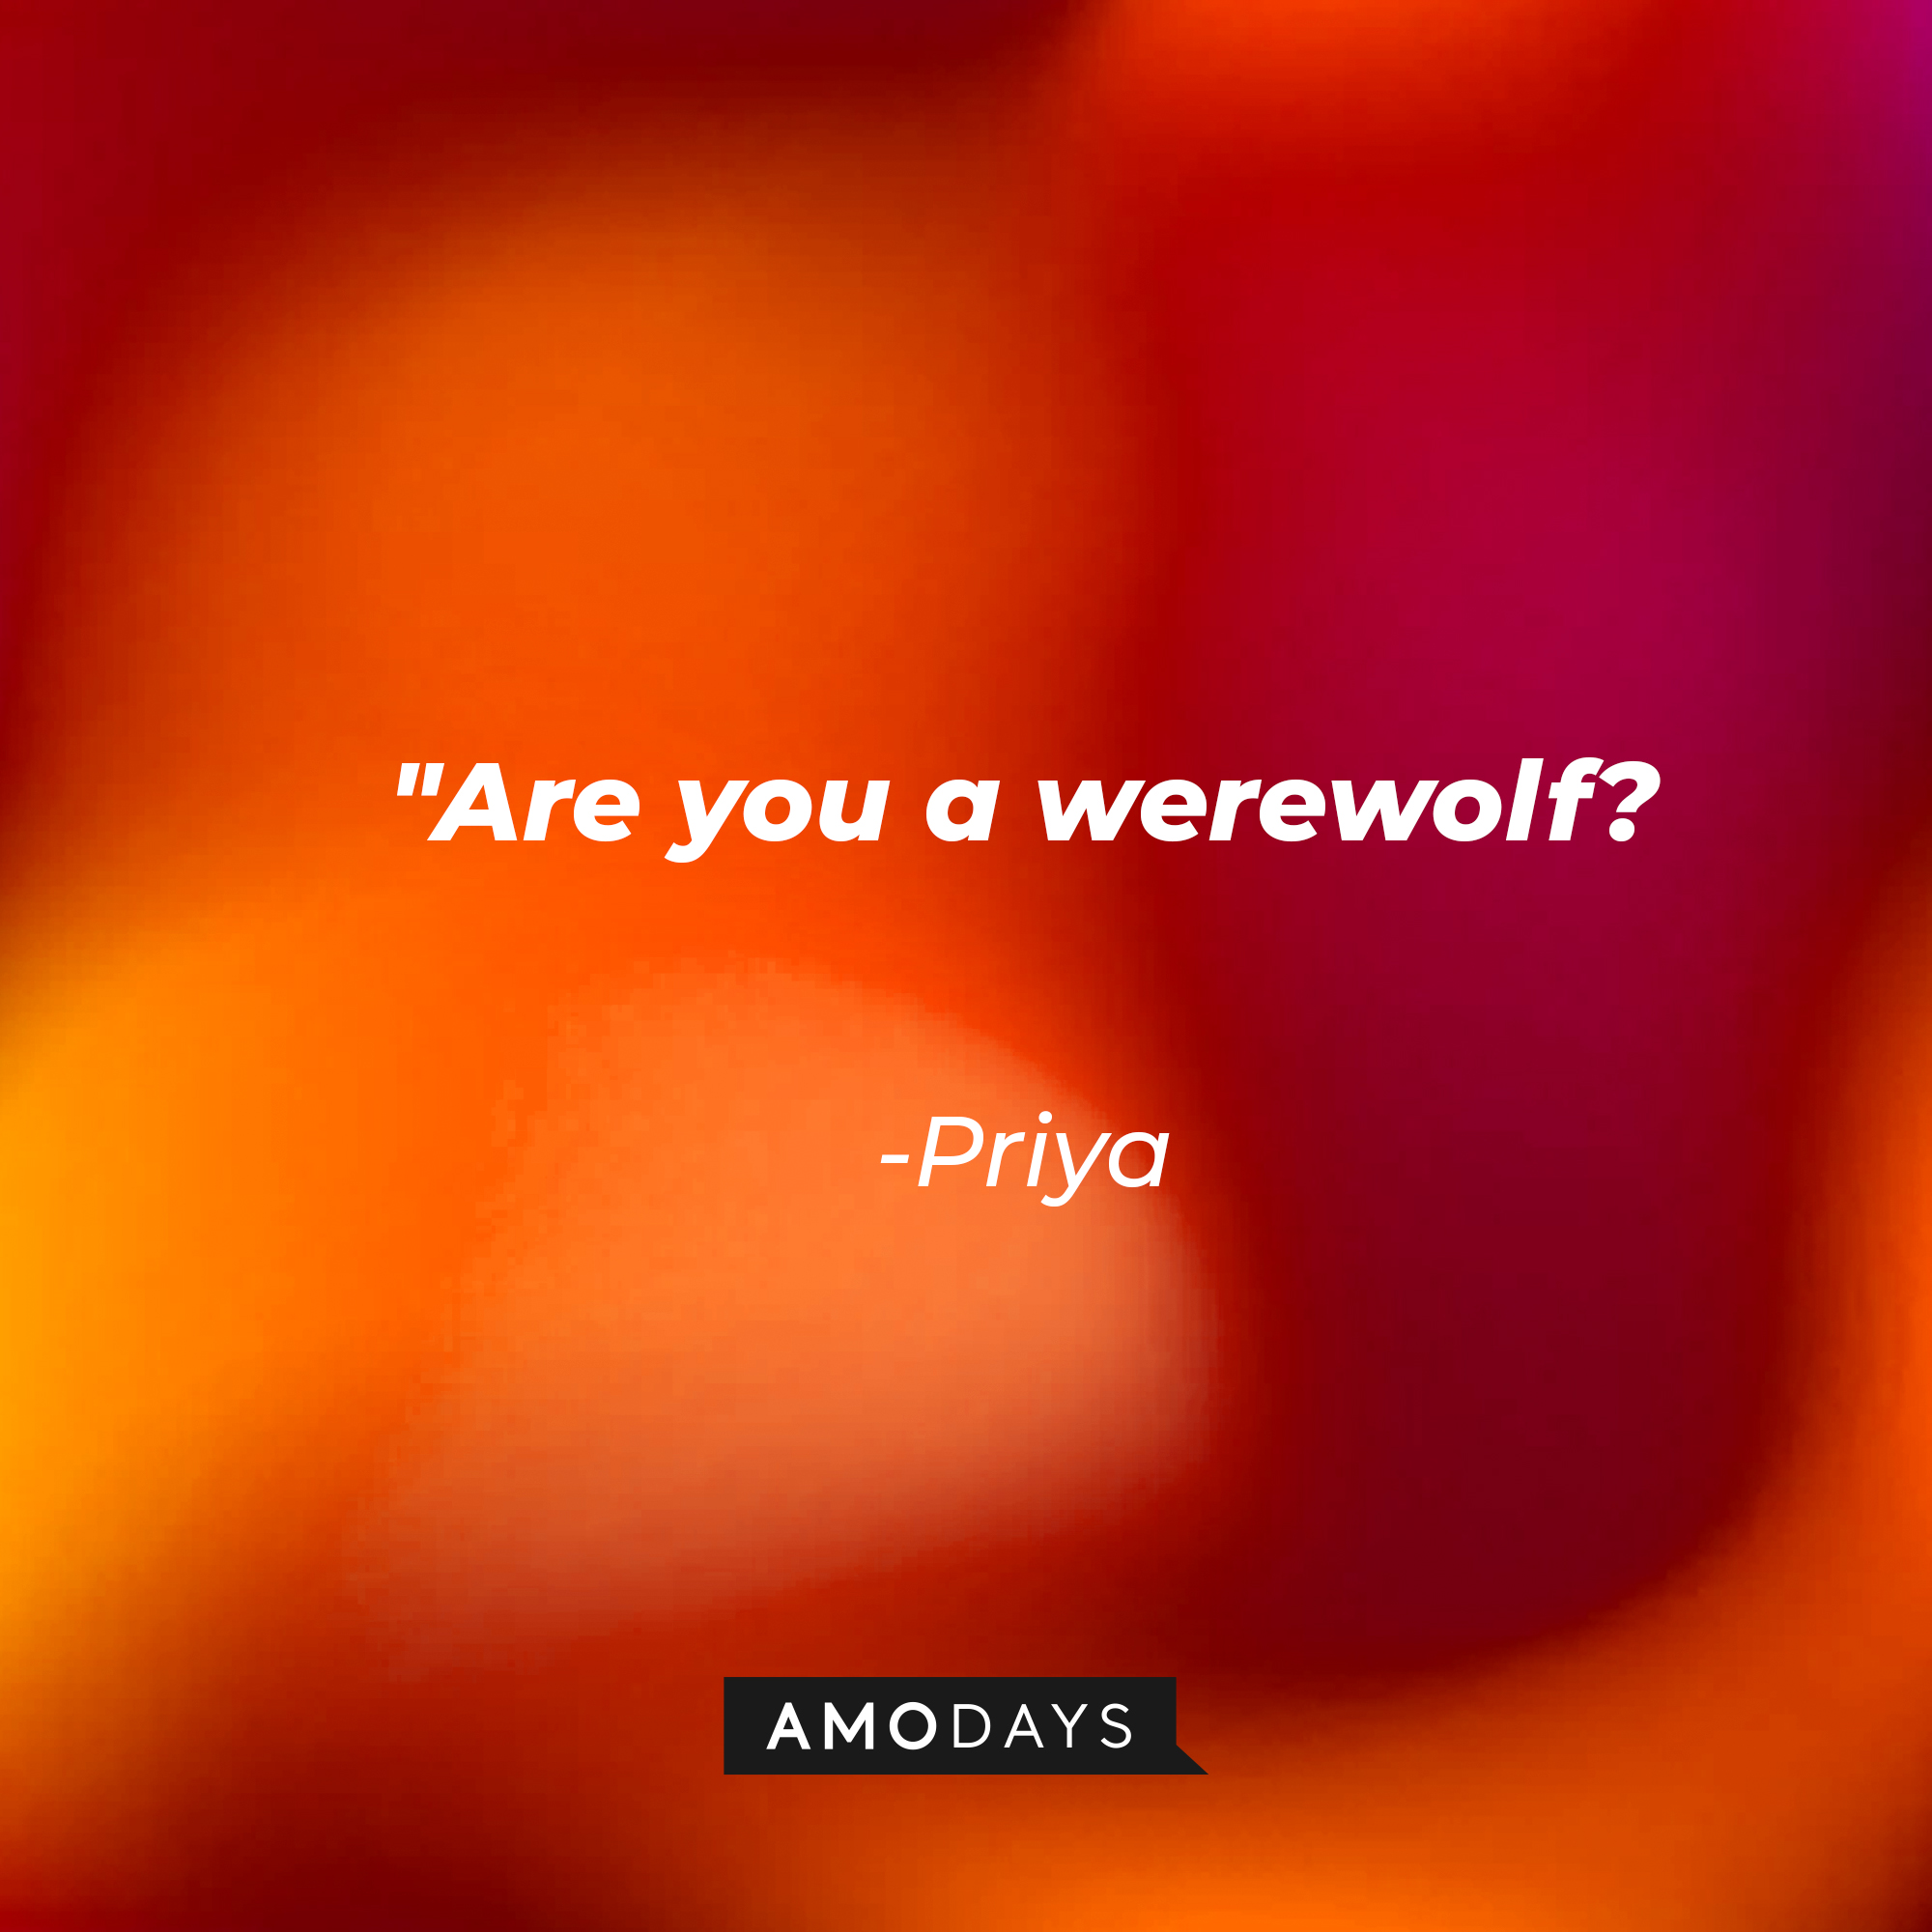 Priya's quote: "Are you a werewolf?" | Source: AmoDays